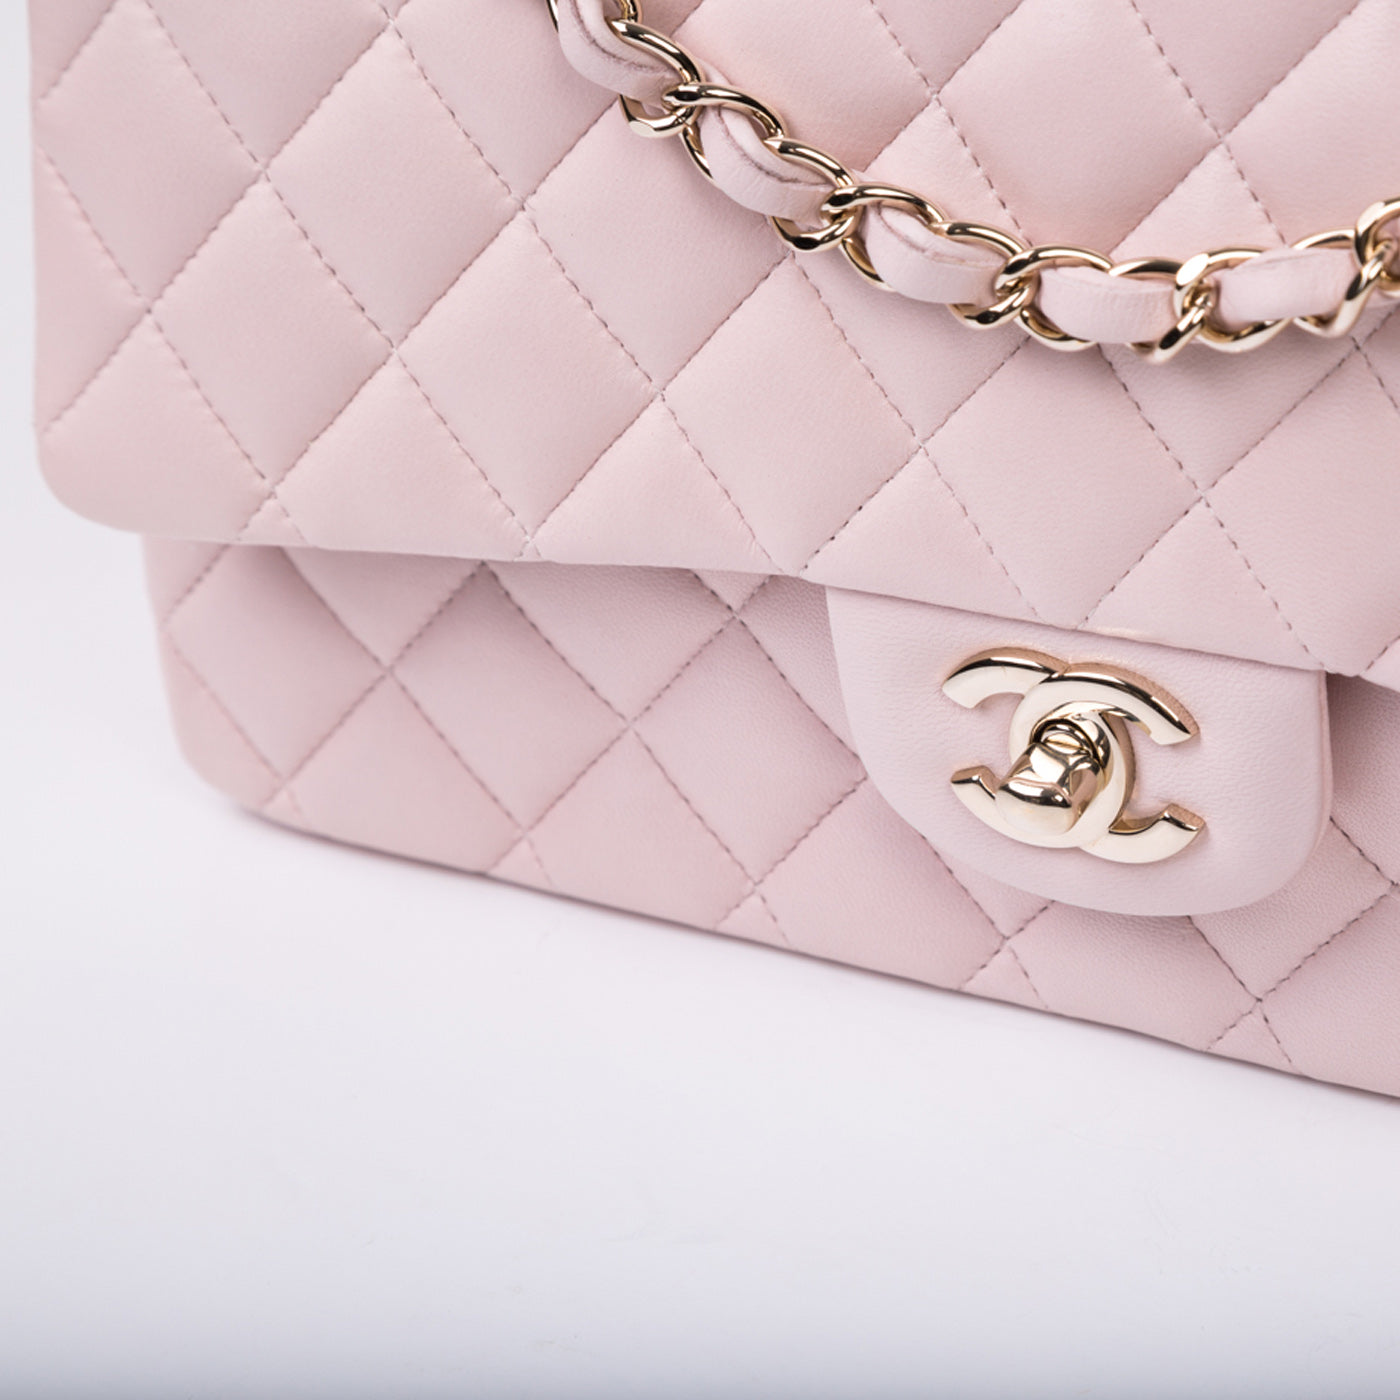 Chanel Classic Medium Double flap bag pink caviar leather VintageUnited